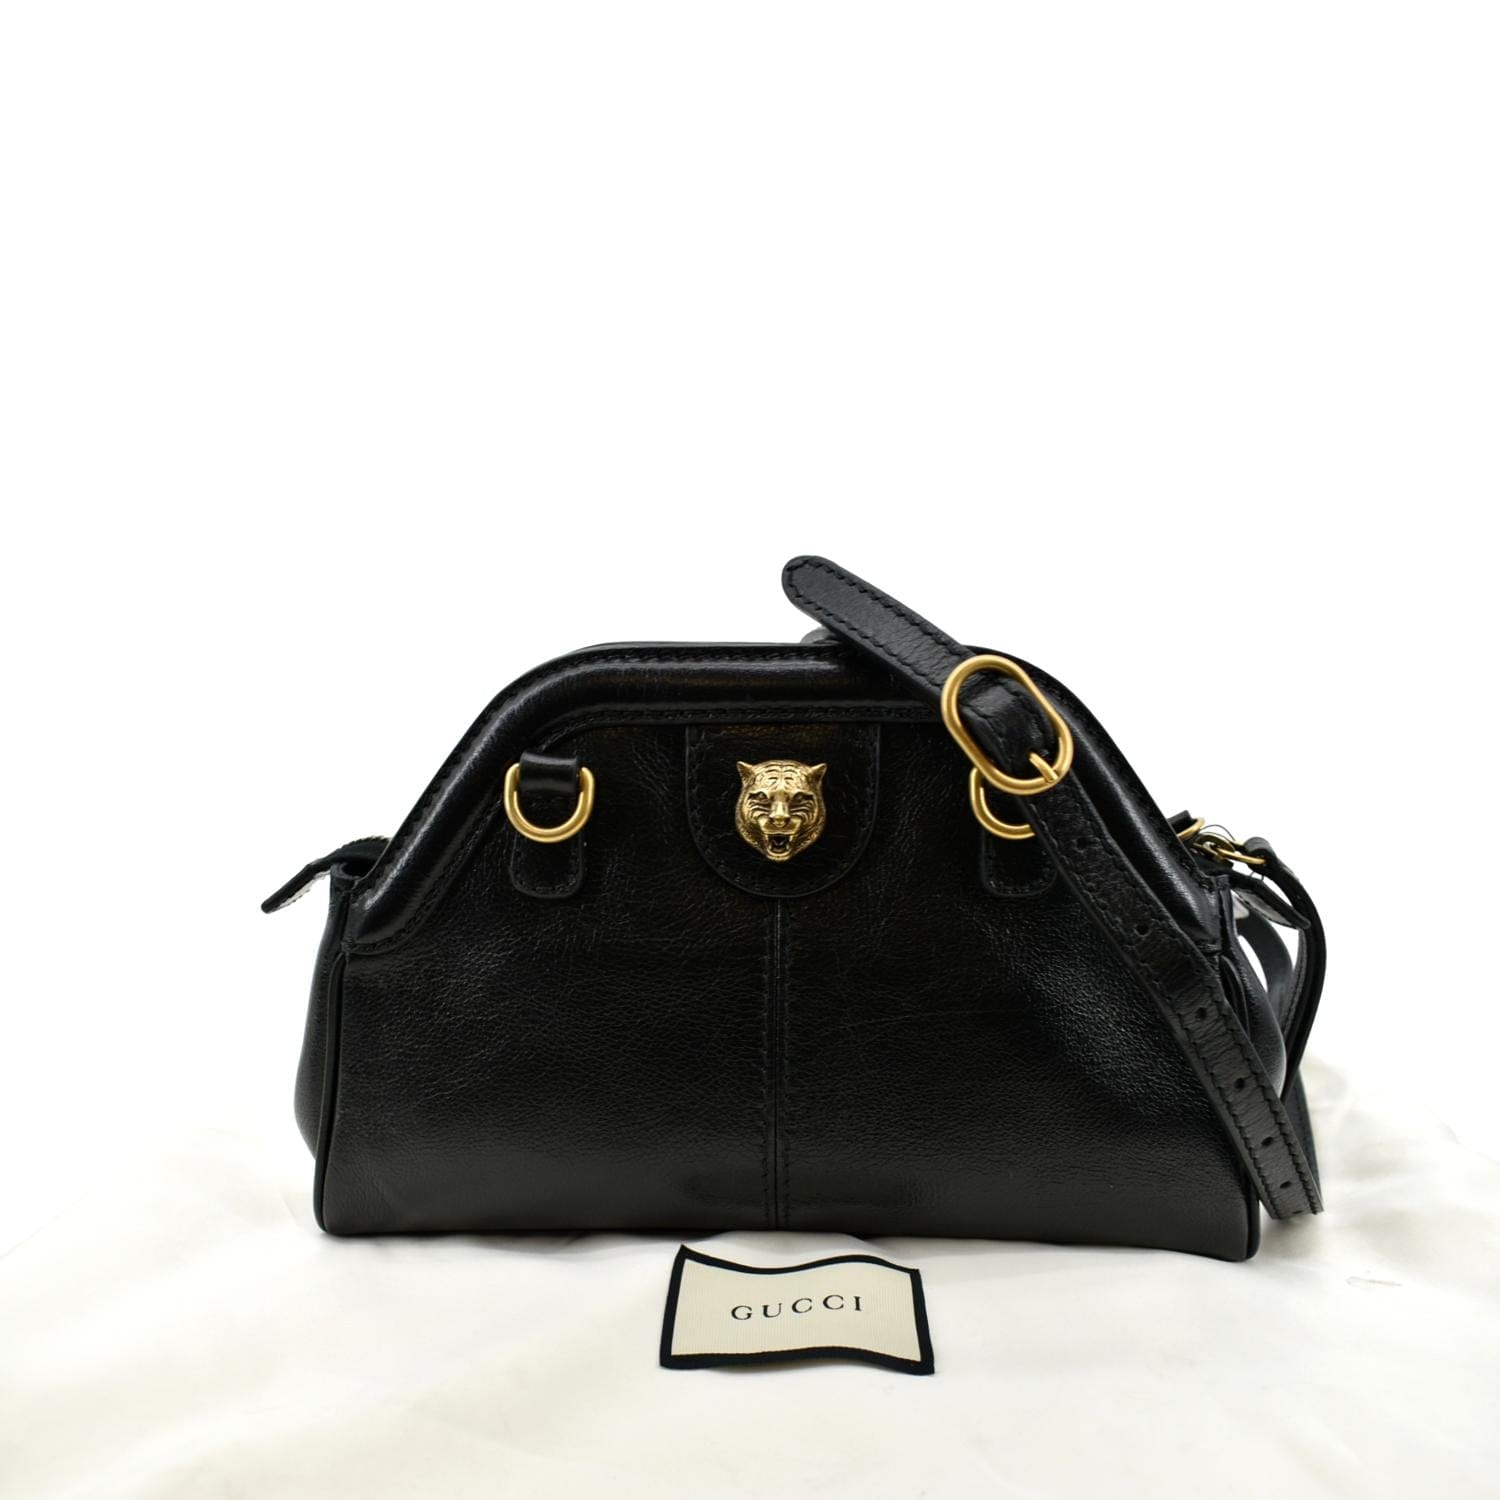 Gucci Re(belle) Medium Convertible Textured-leather Bucket Bag in Black